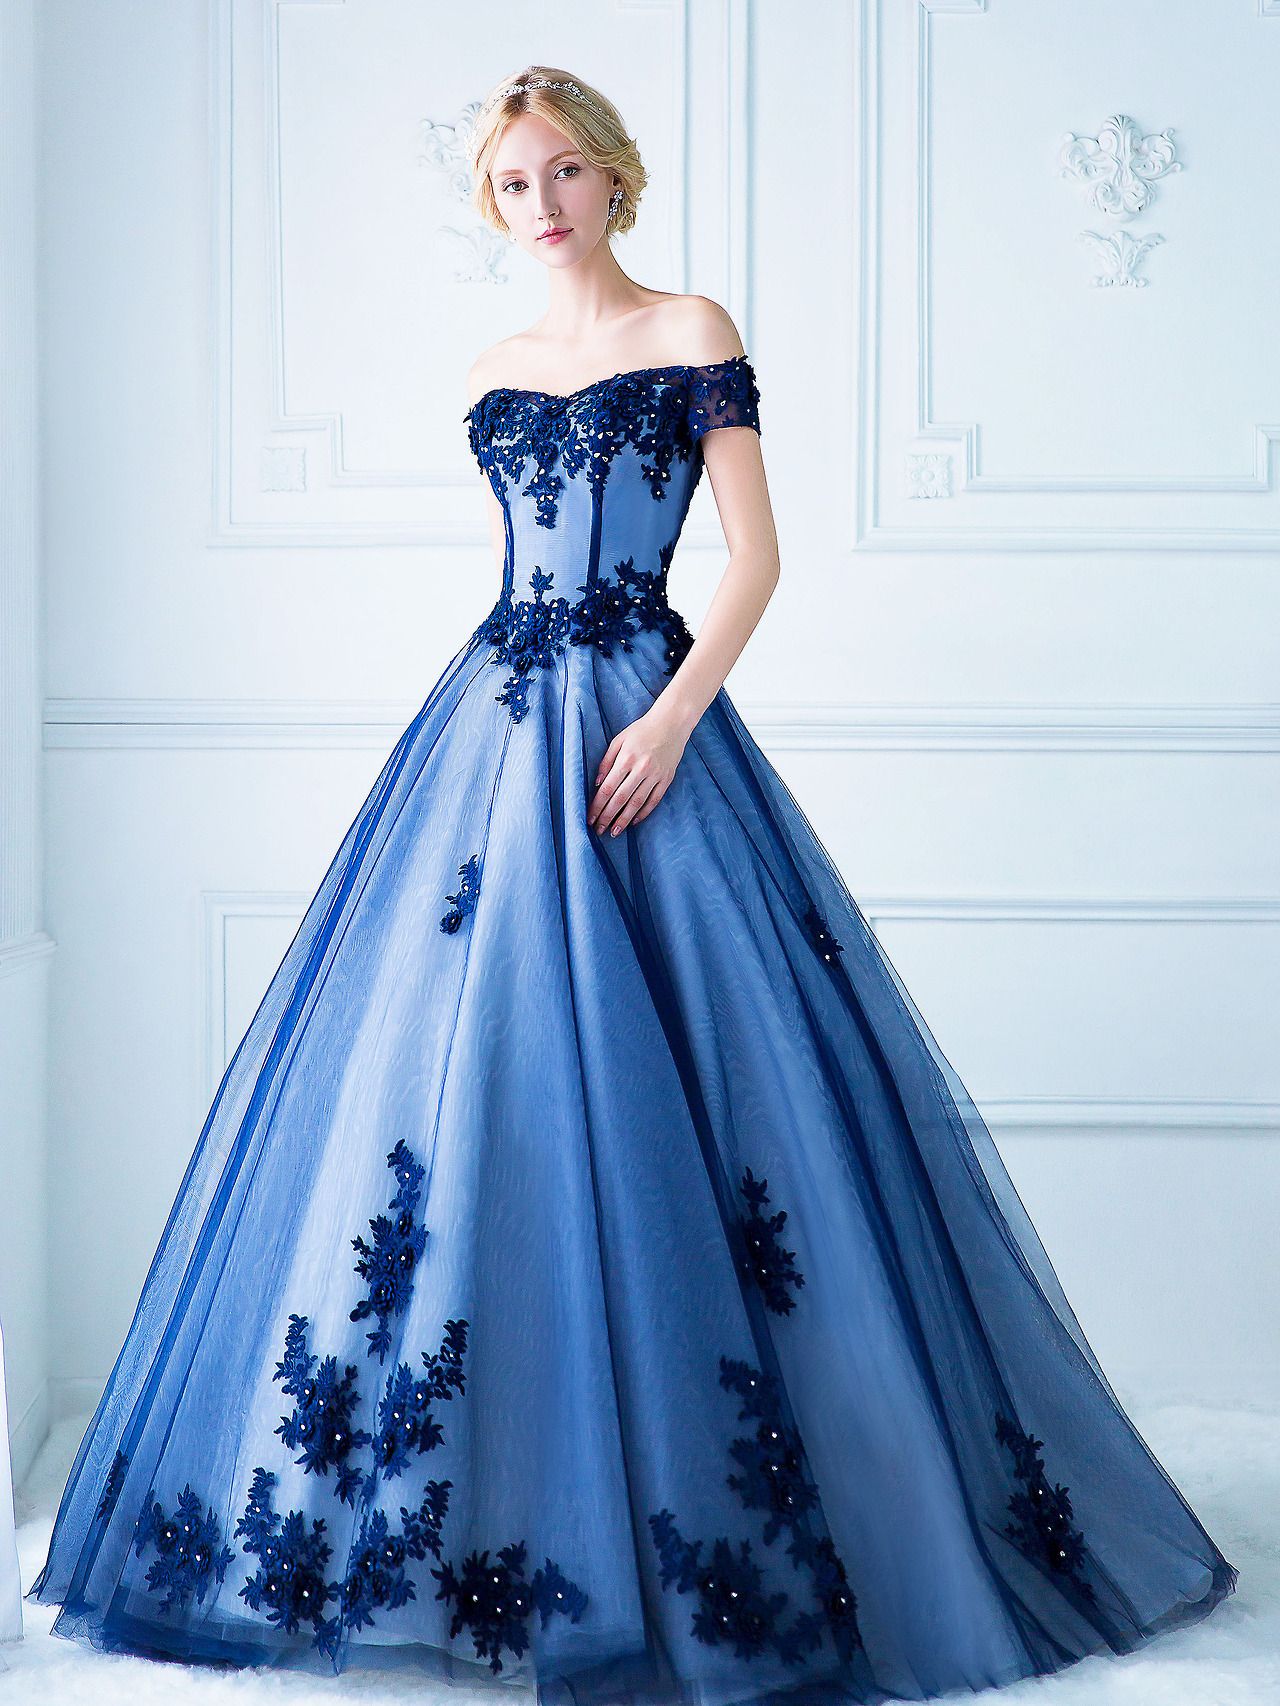 SAPERE AUDE | Ball gowns prom, Chic prom dresses, Tulle prom dress